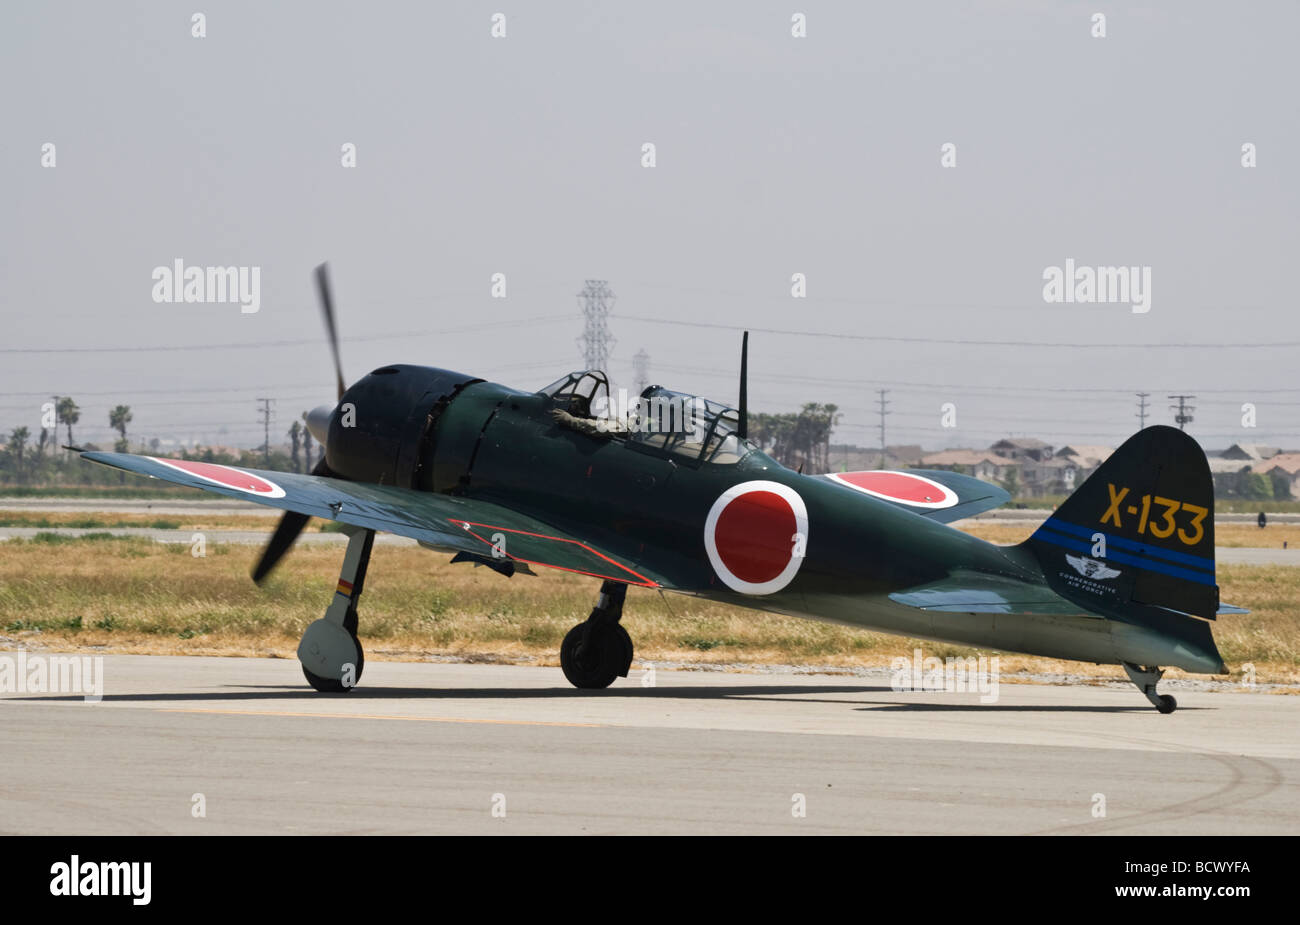 A Mitsubishi A6M5 Zero fighter taxis after flying at an air show.  One of only 3 or 4 airworthy Zero fighters in the world. Stock Photo